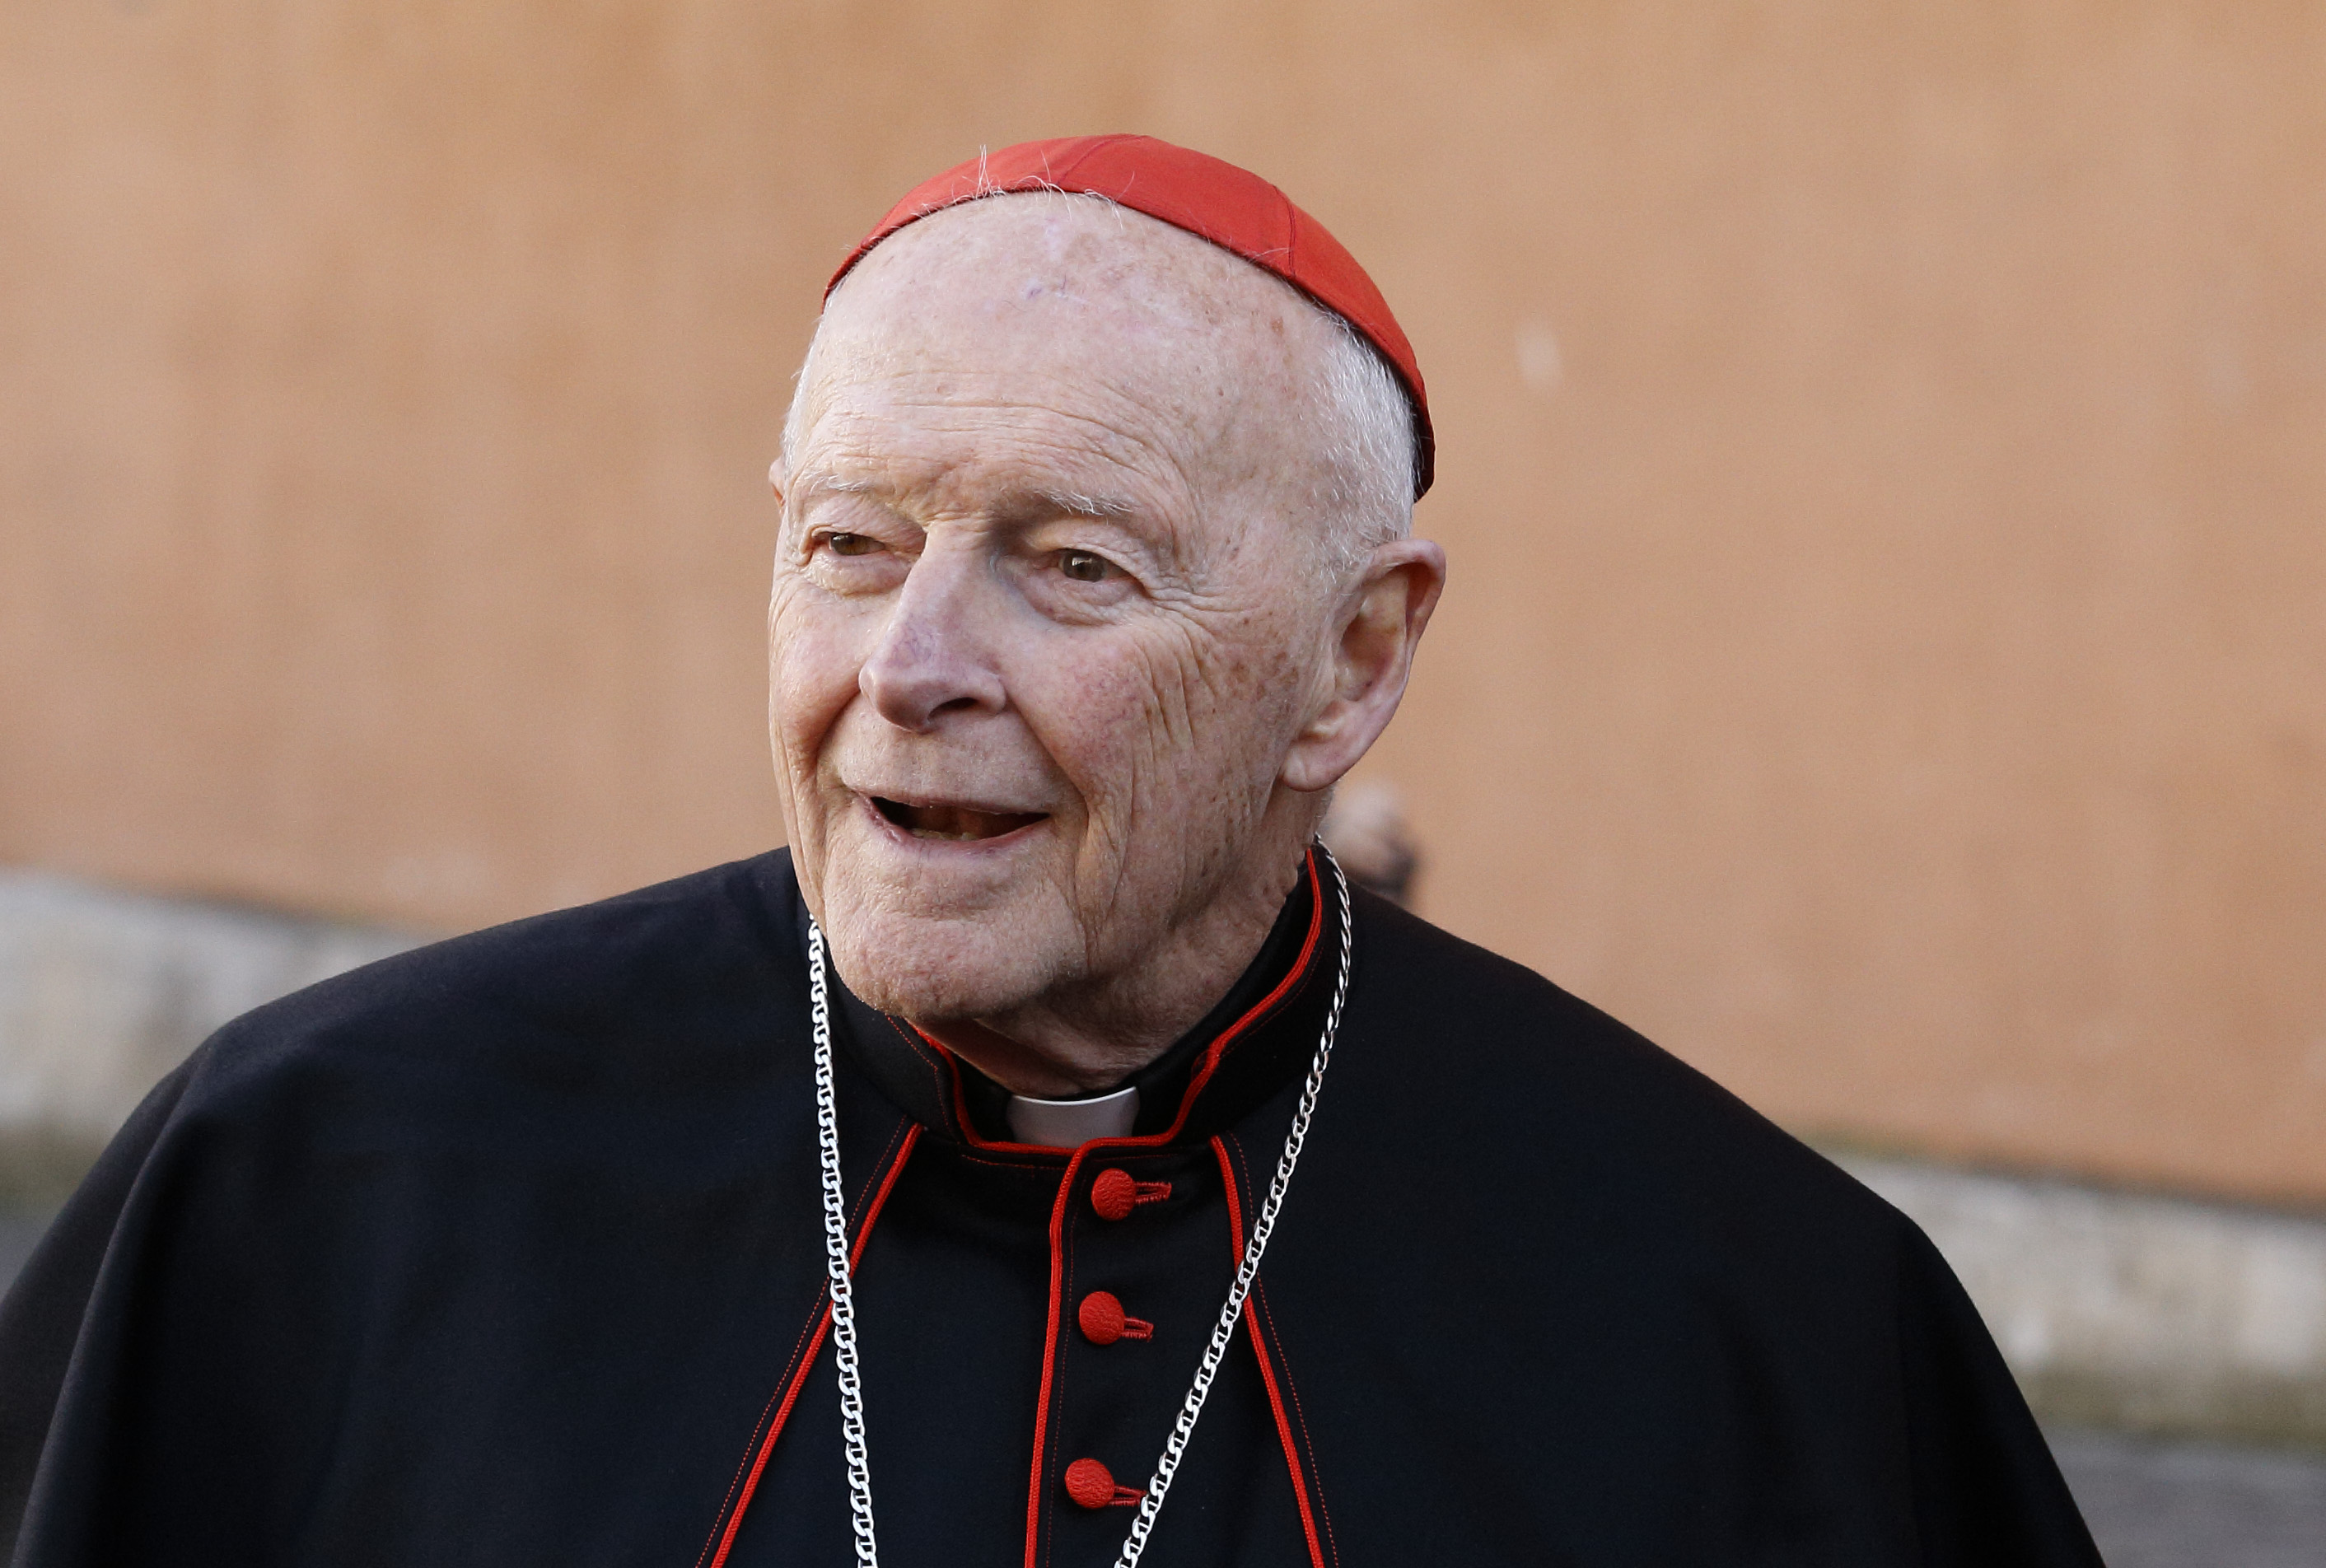 New abuse allegations levelled at McCarrick 